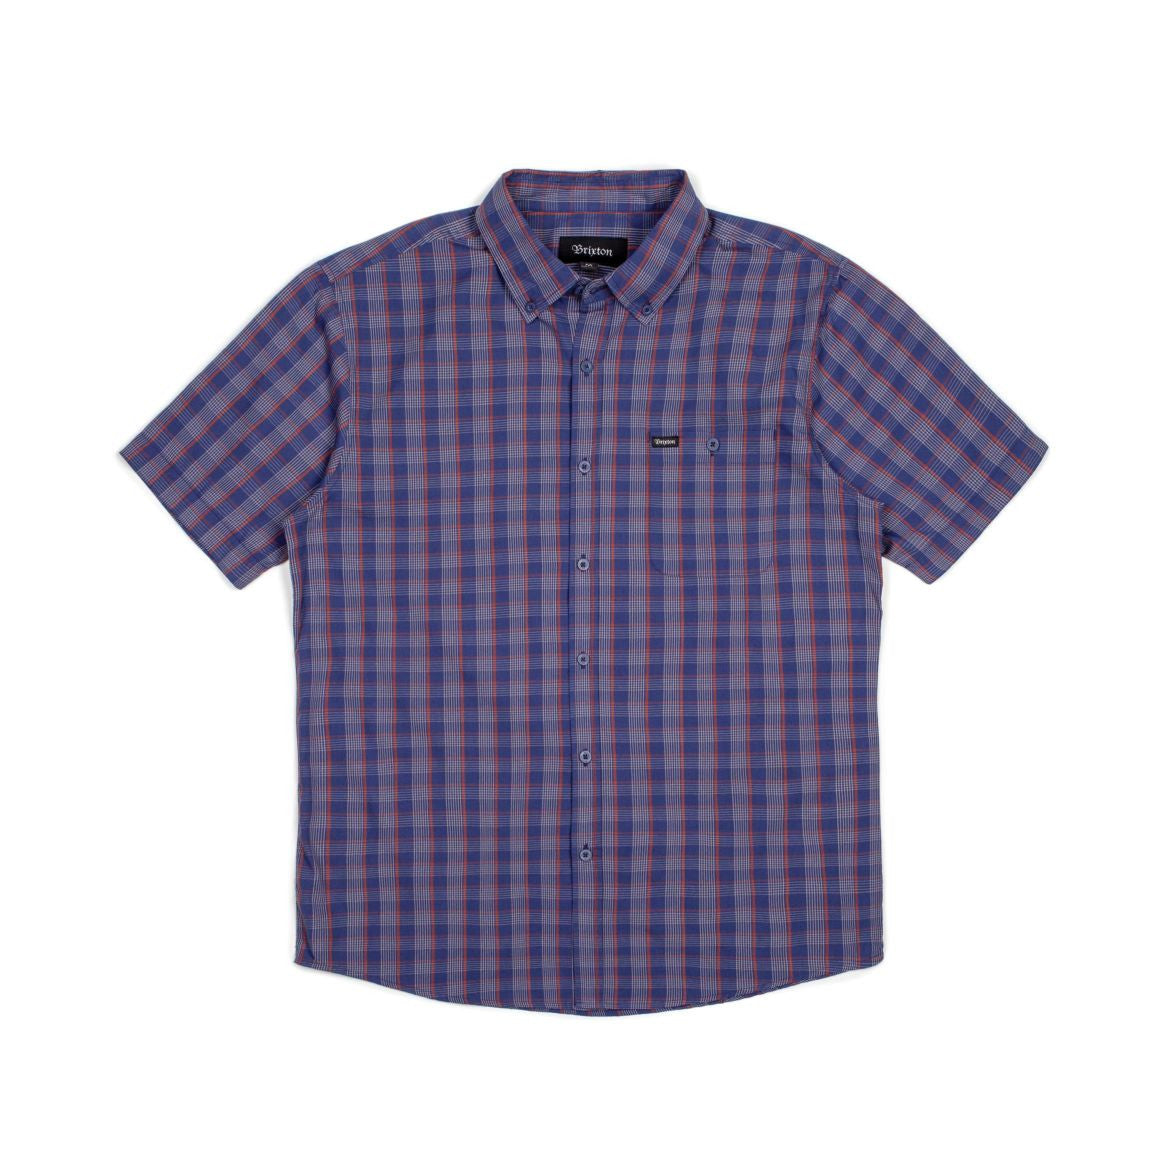 Brixton - Howl Men's S/S Woven Shirt, Navy/Red/White - The Giant Peach